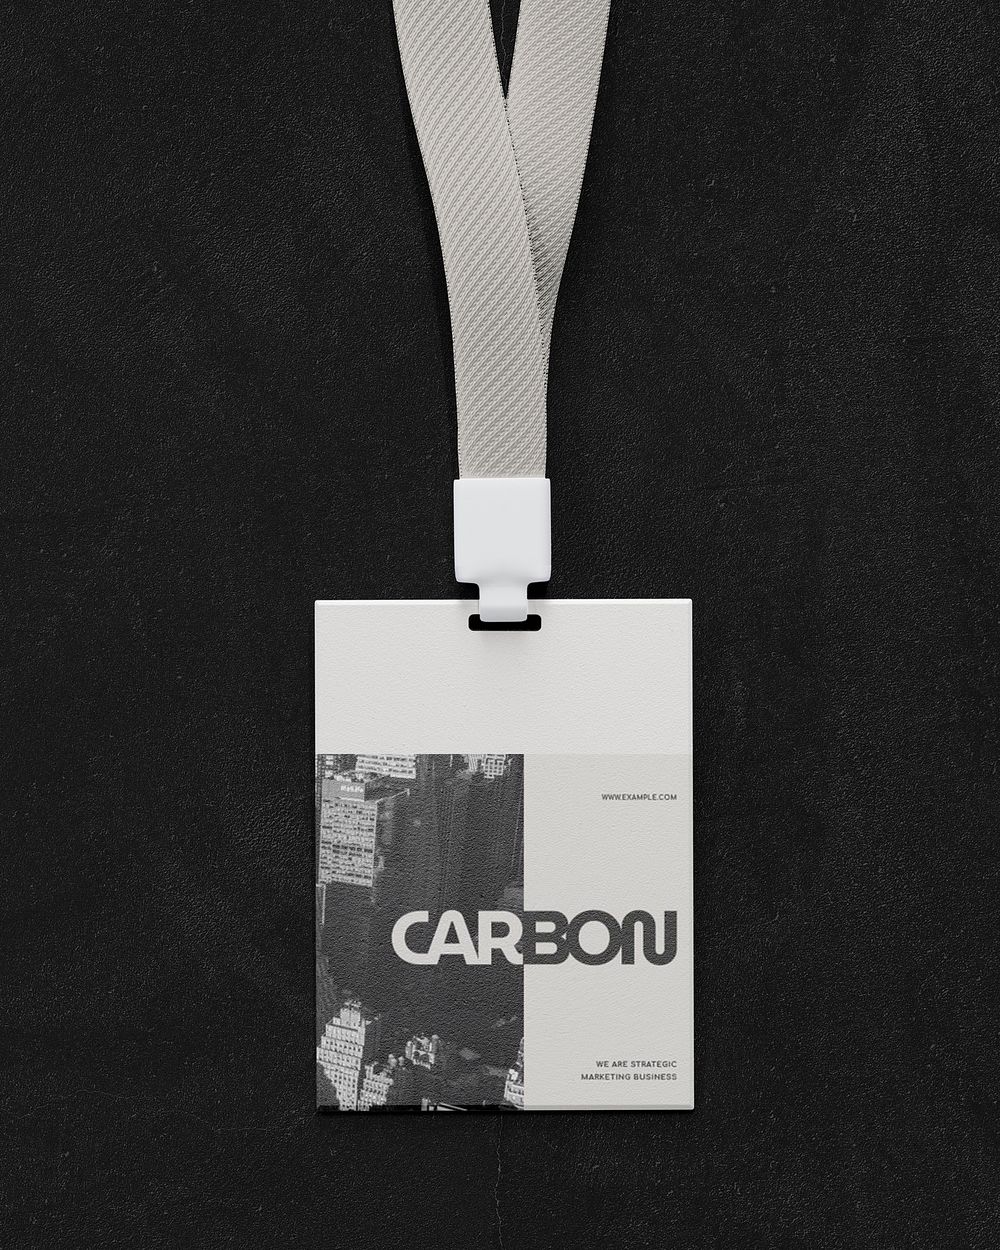 Carbon business badge, lanyard, corporate identity